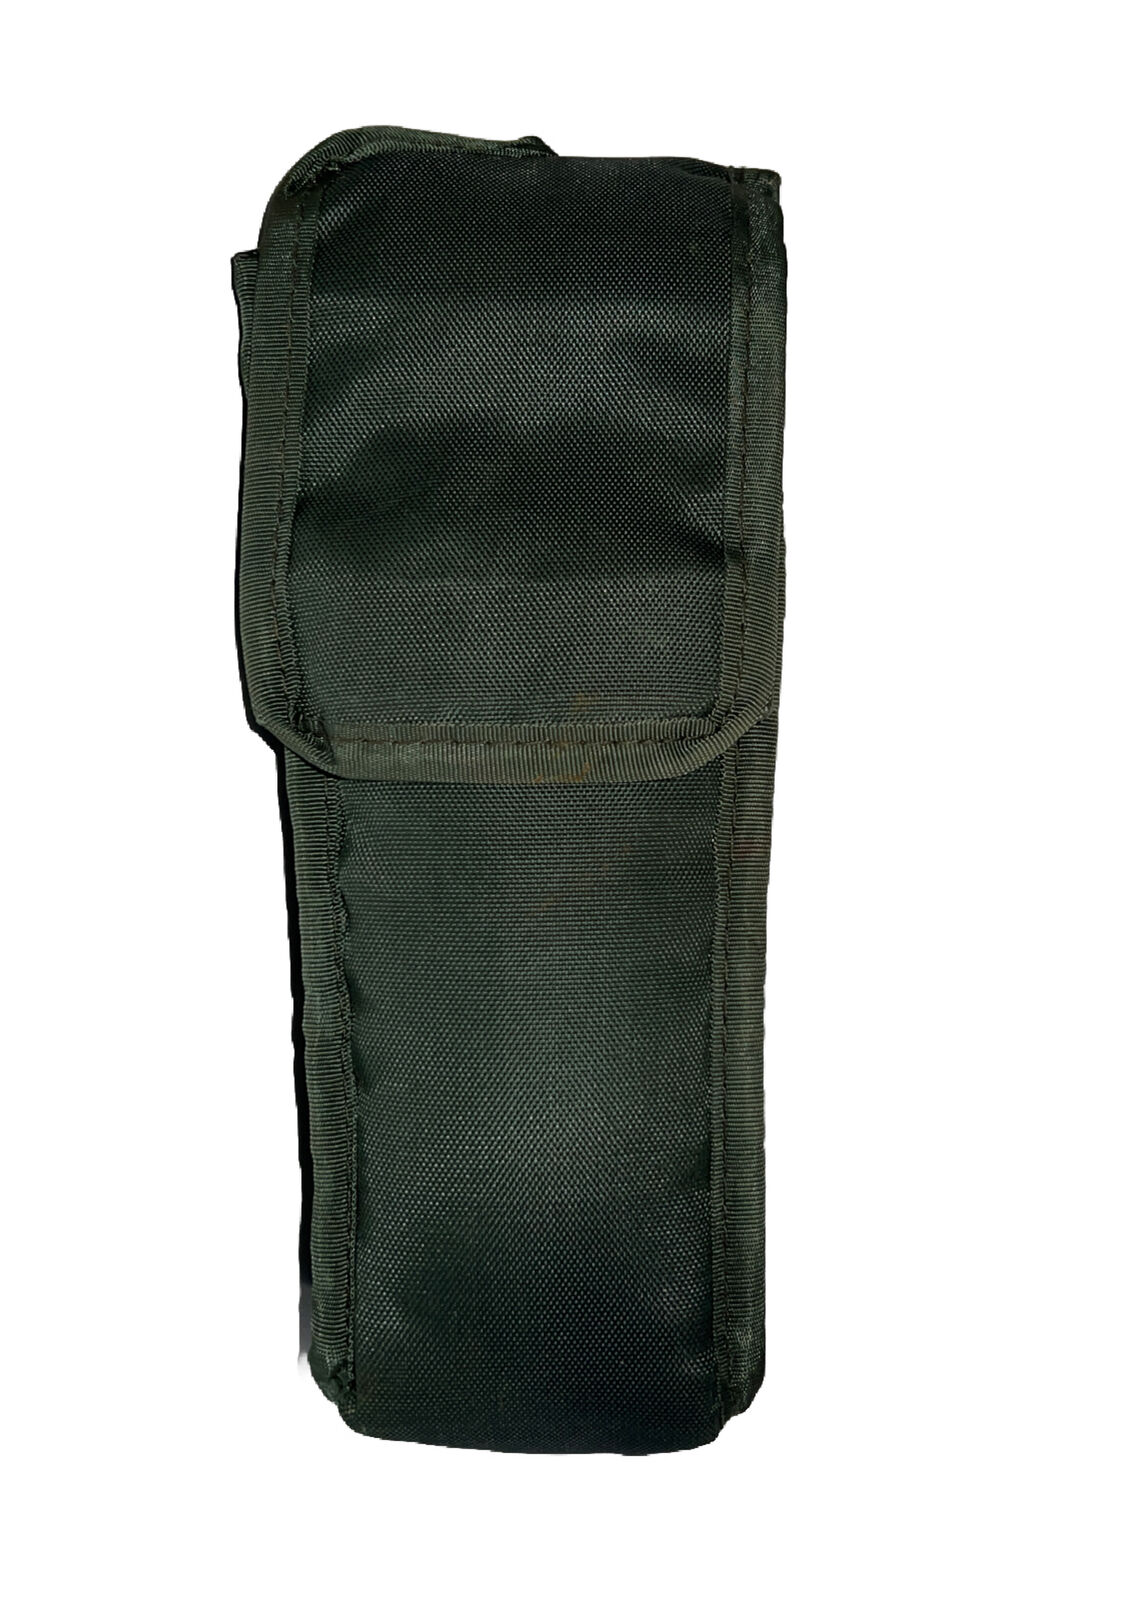 Military AN/PRC 127 Radio Holster TA-50 Pouch, Alice, NSN:8105-01-276-4810,Green